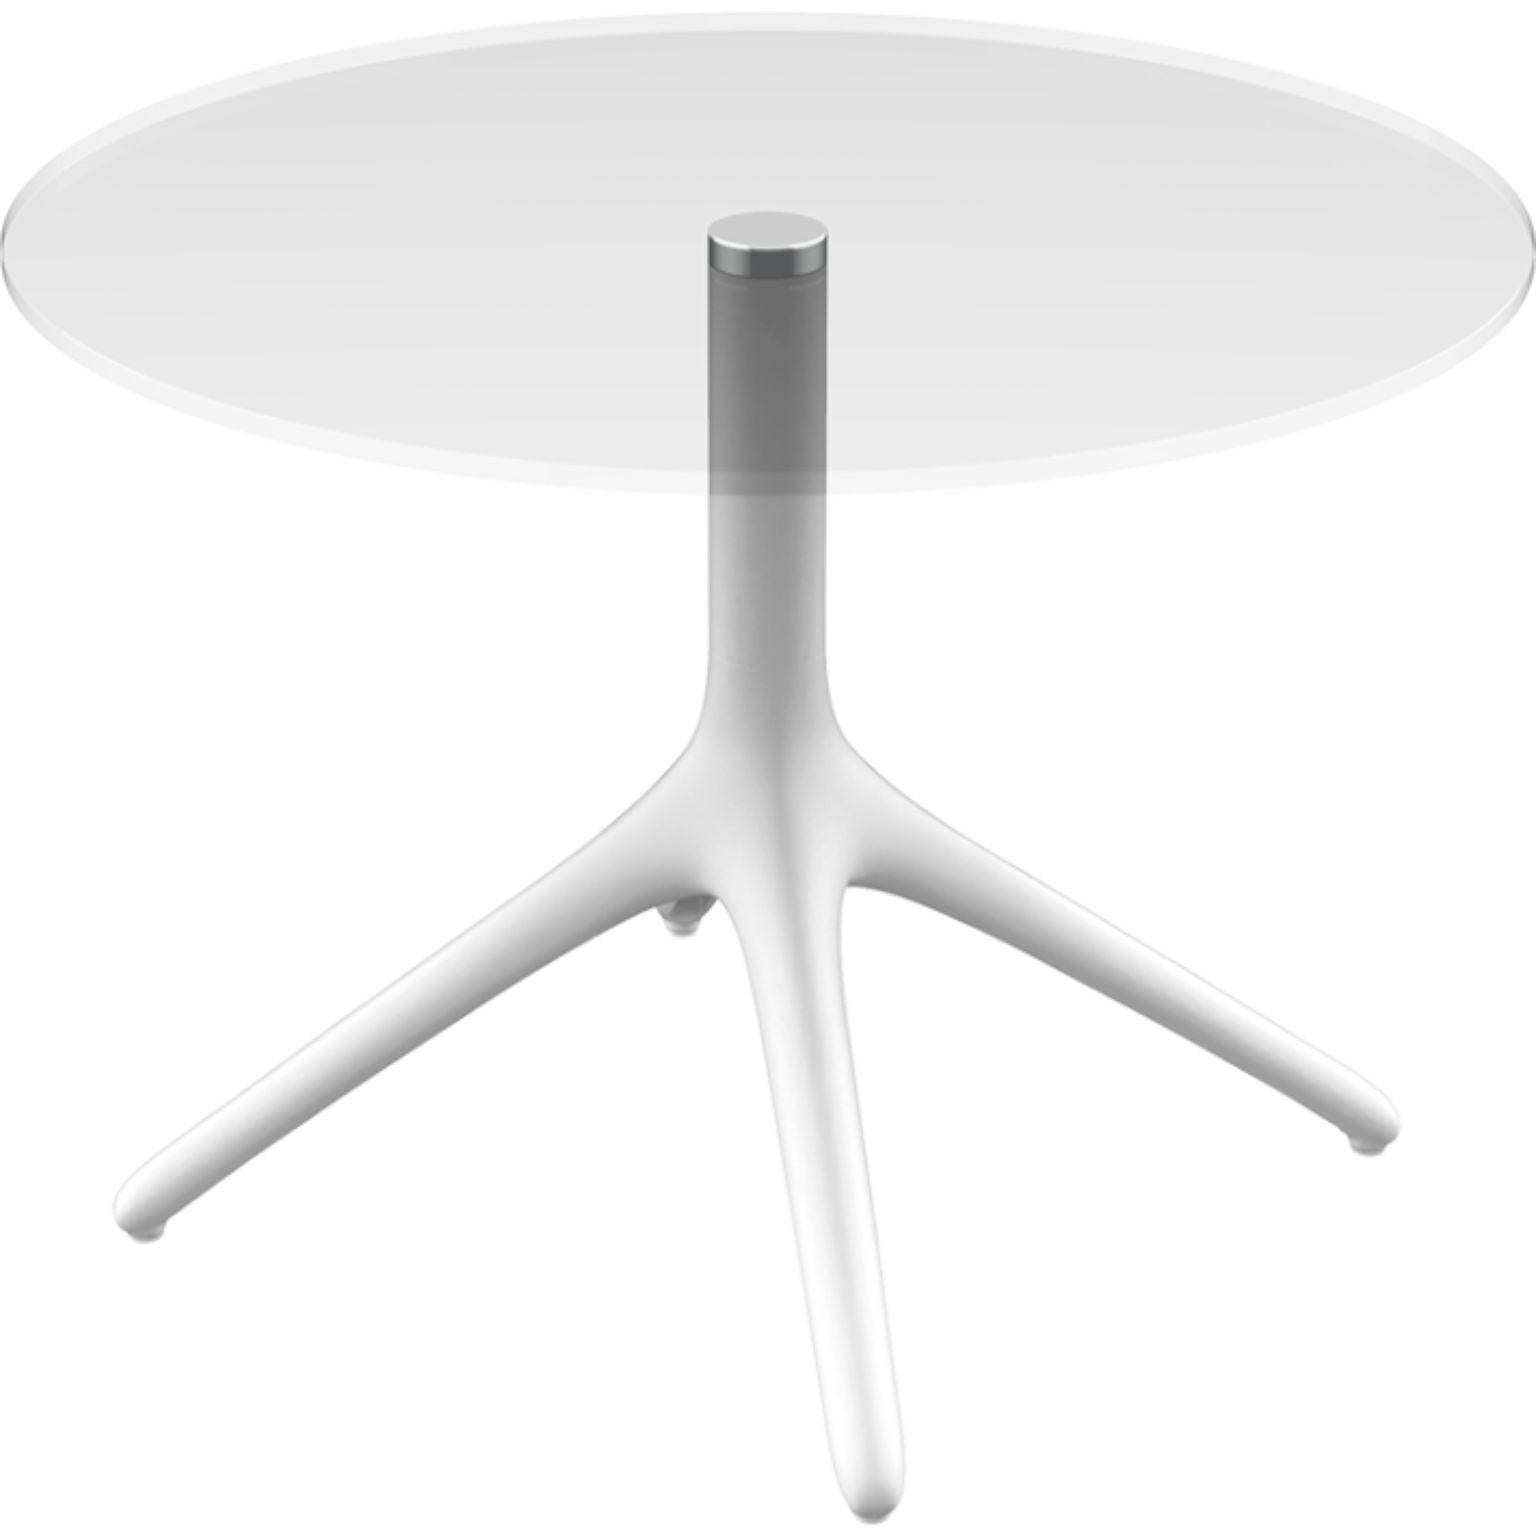 Uni white table 50 by MOWEE
Dimensions: D 45.5 x H 50 cm
Material: Aluminium, Tempered Glass
Weight: 5 kg
Also available in different colours and finishes. Collapsable version available.-

A table designed to be as versatile as possible and